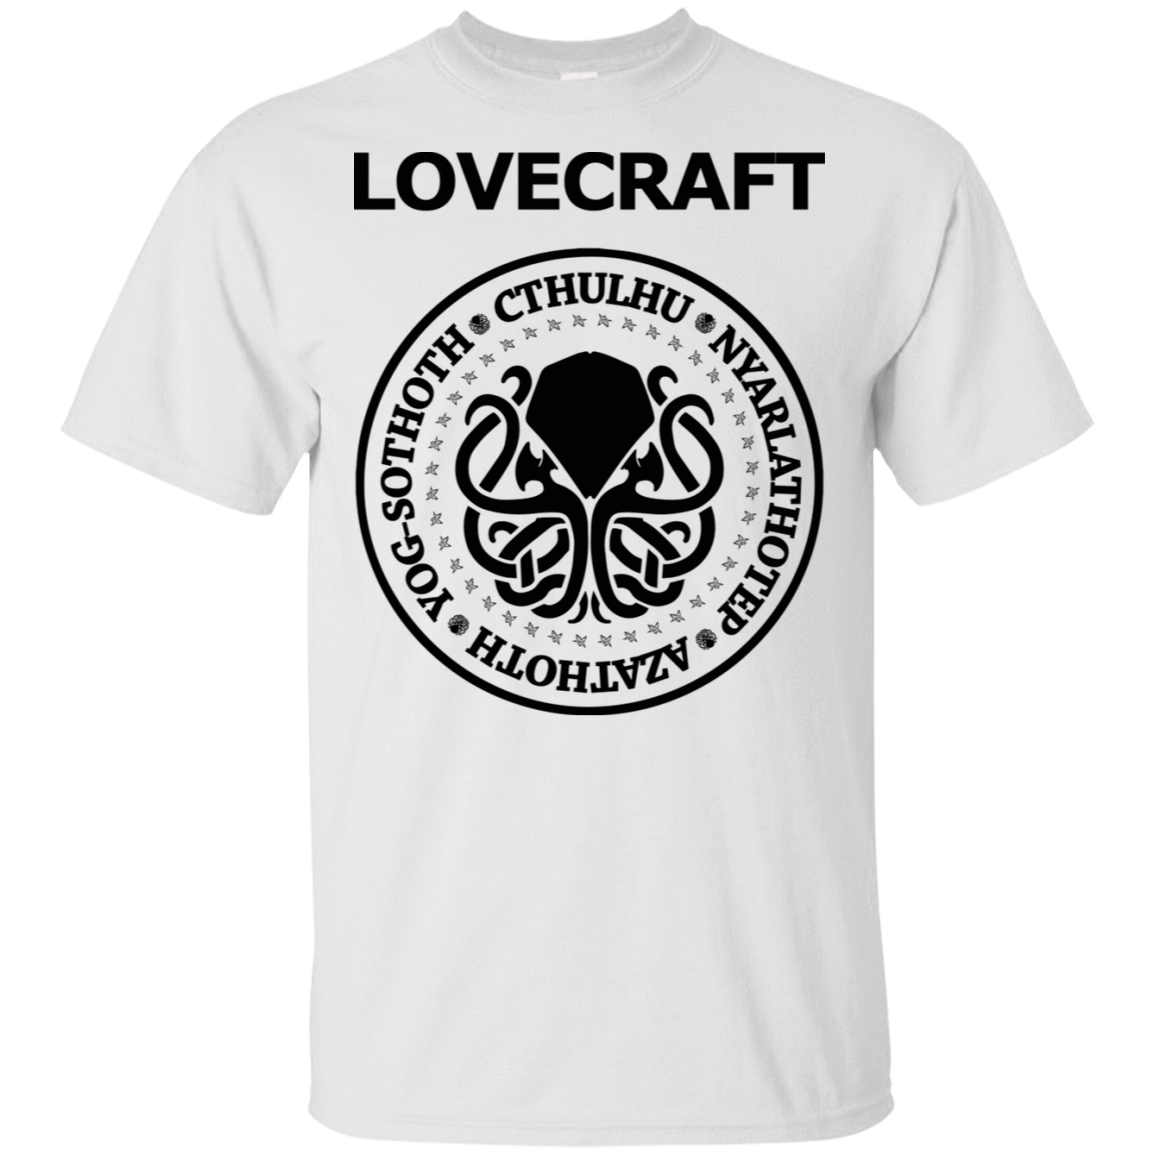 T-Shirts White / S Lovecraft T-Shirt